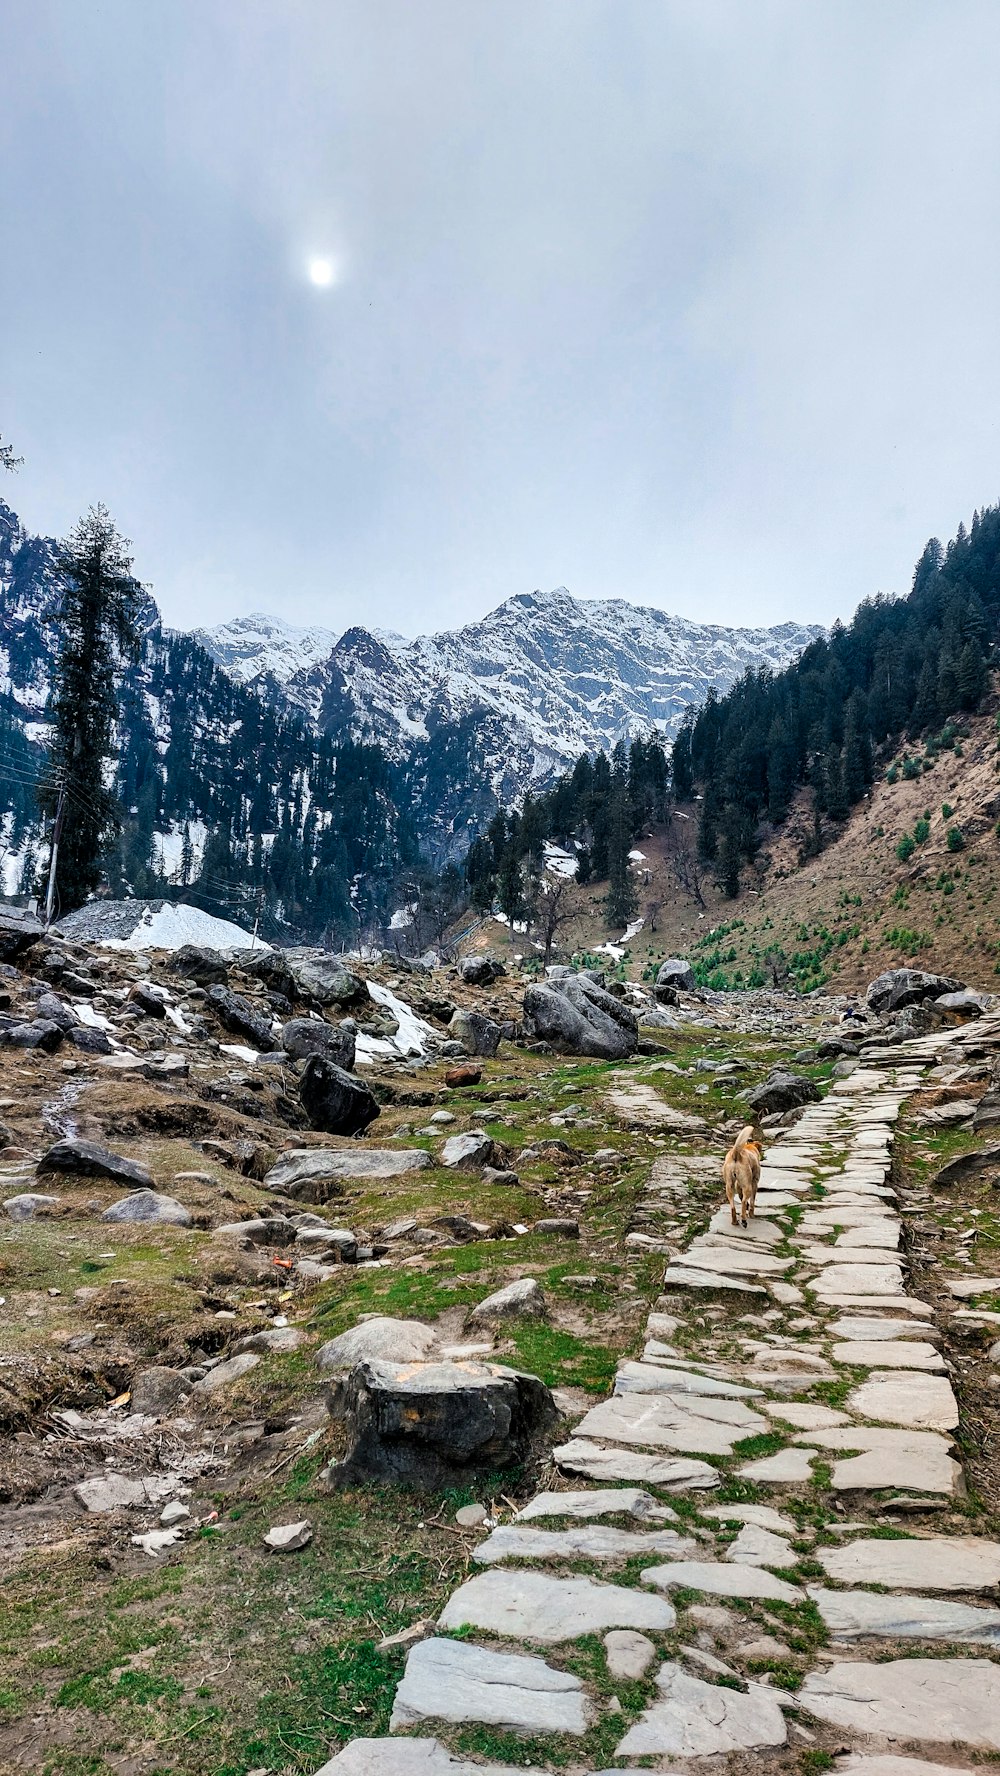 a dog walking on a rocky path in front of a mountain